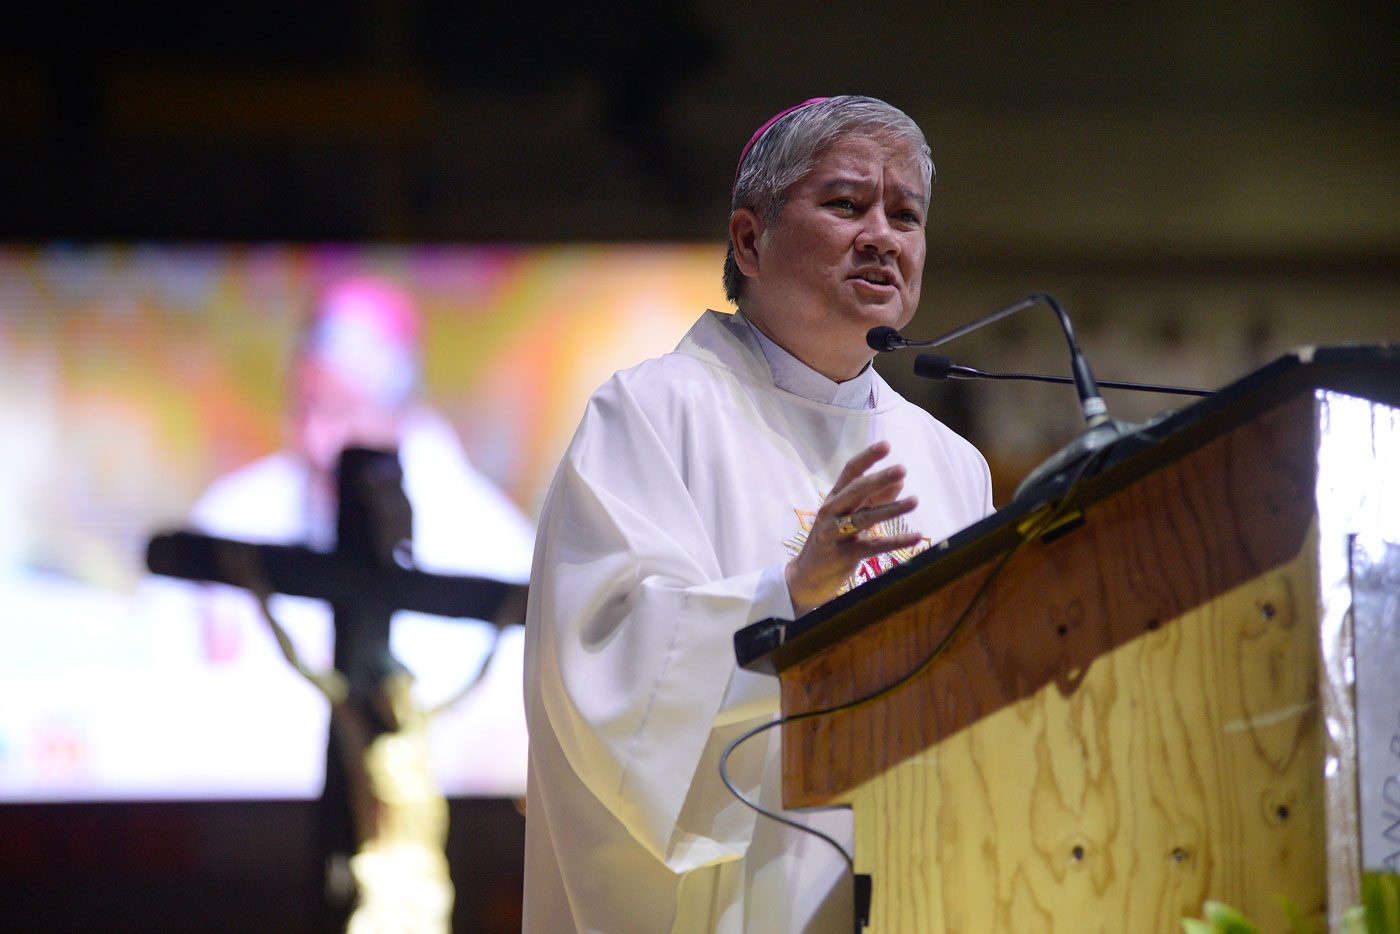 CBCP: ‘In the name of God, stop the killings!’